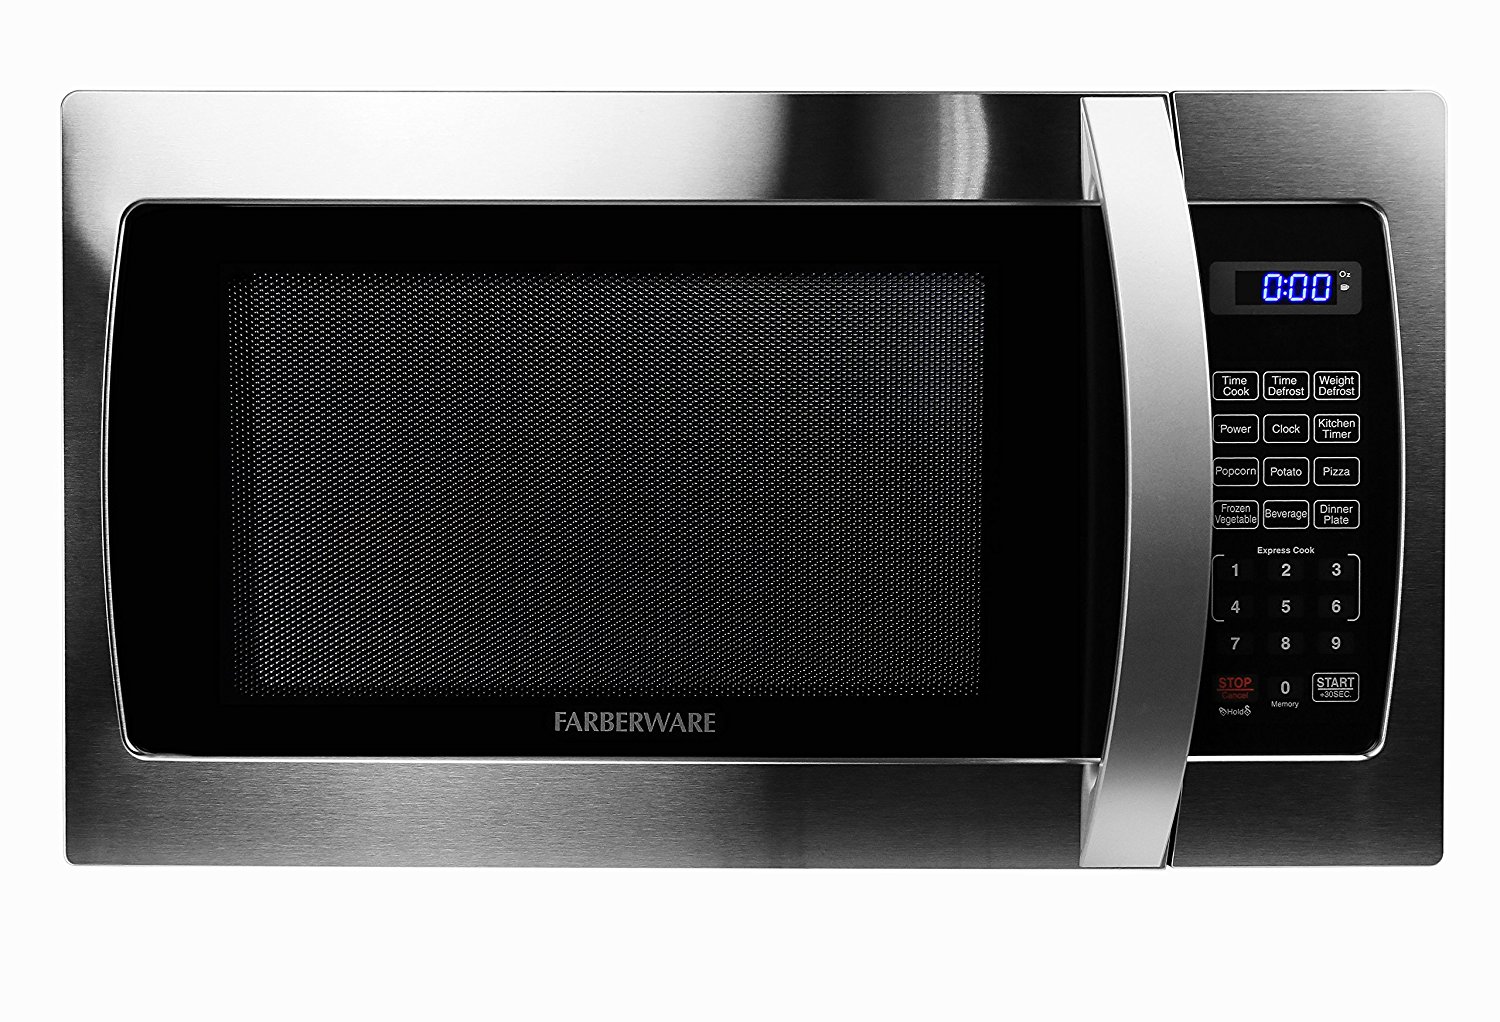 Farberware Microwave Oven - Don't Waste Your Money